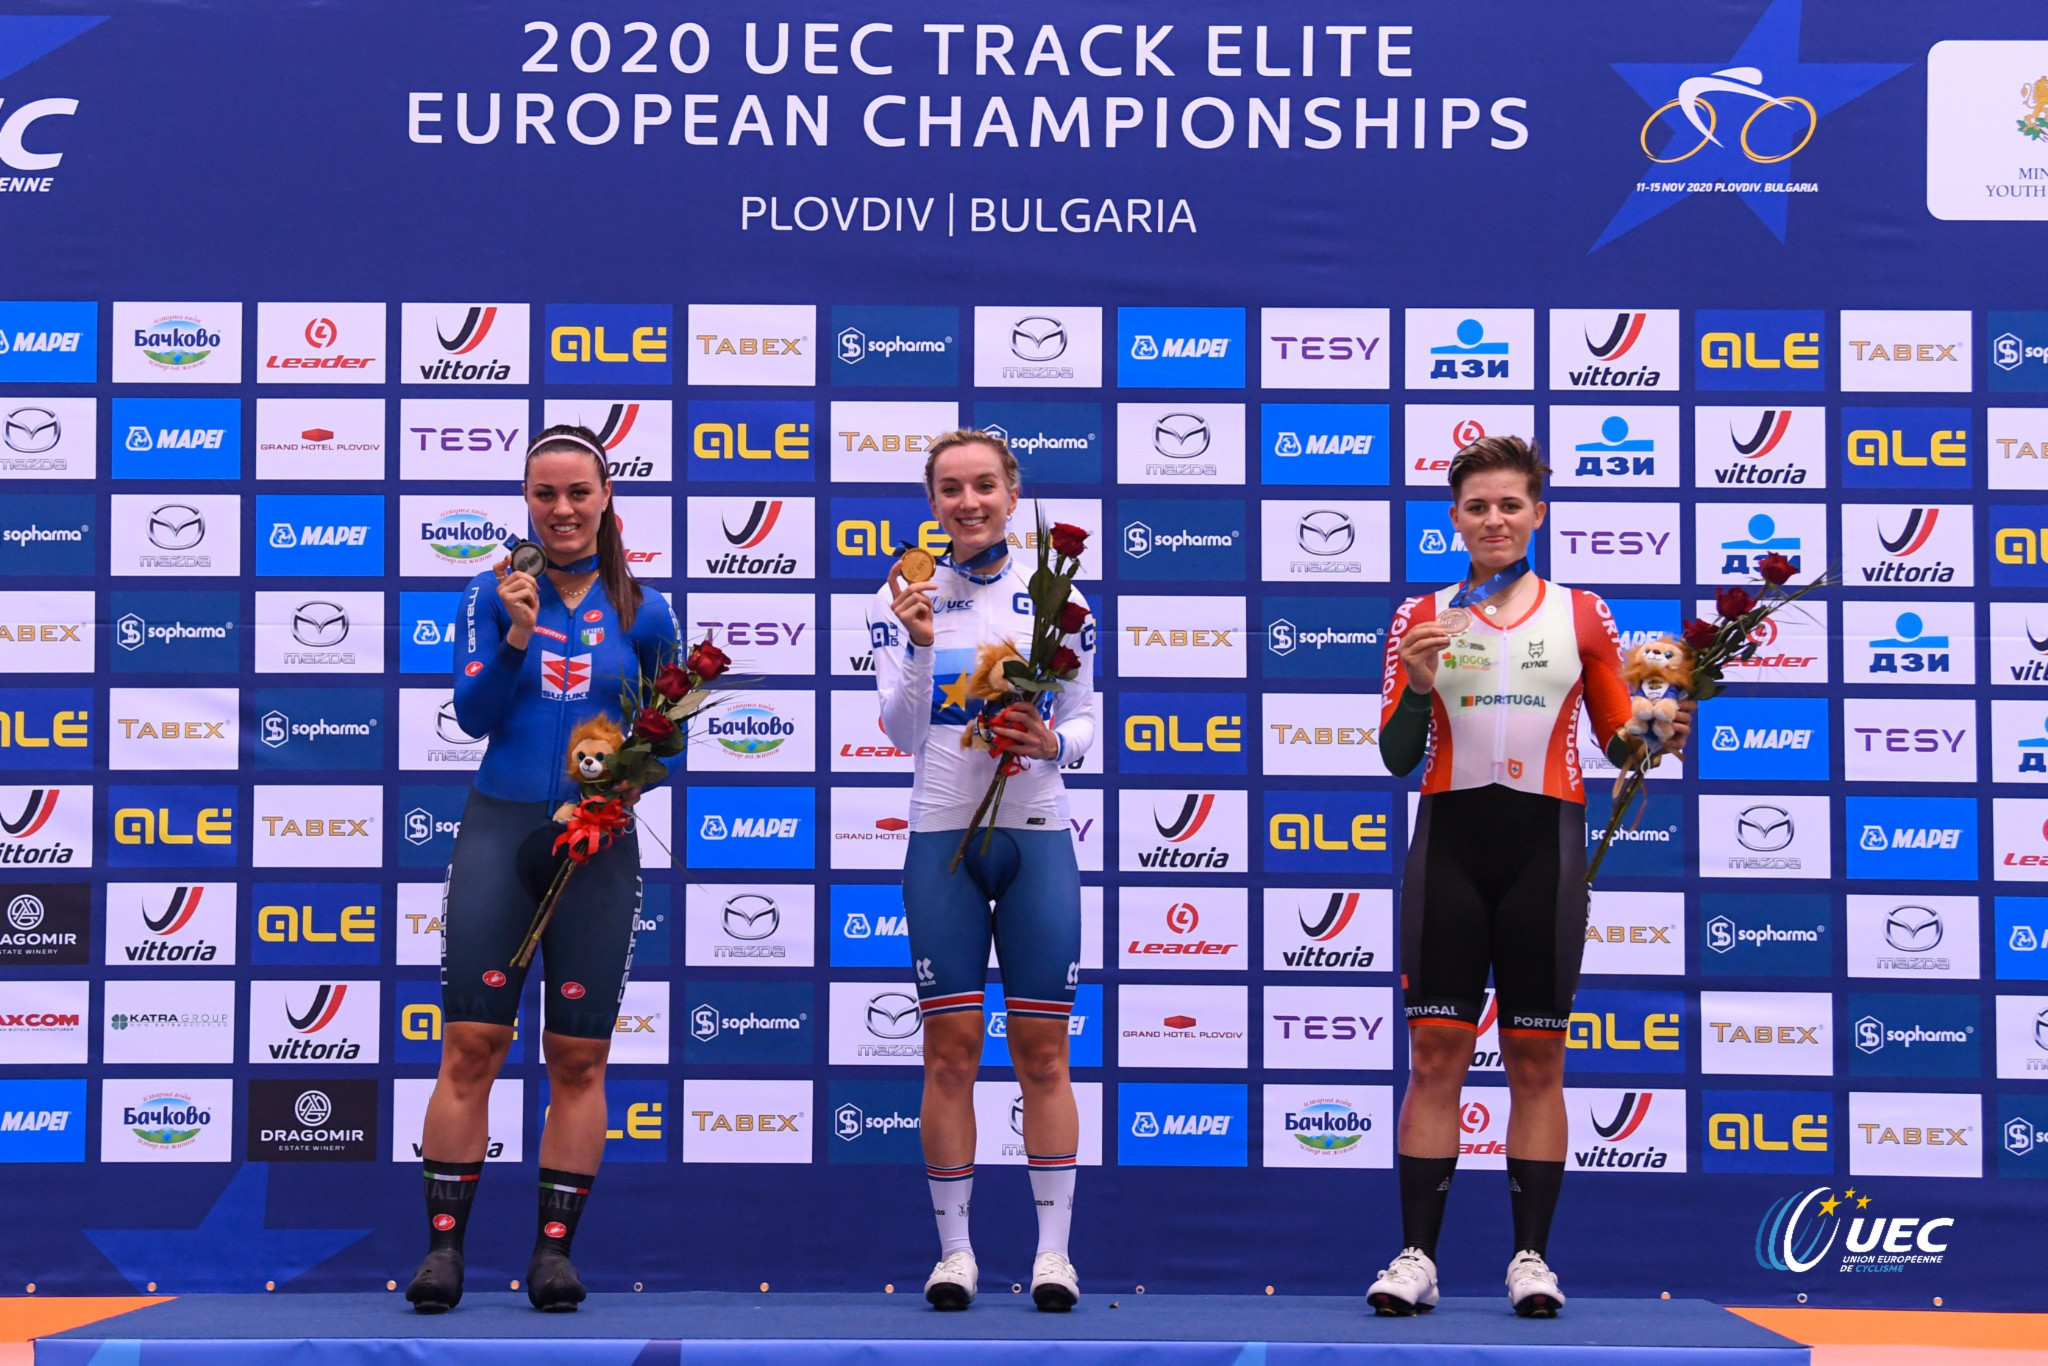 The medallists in the women's elimination race - from left Rachele Barbieri, Elinor Barker and Maria Martins ©UEC